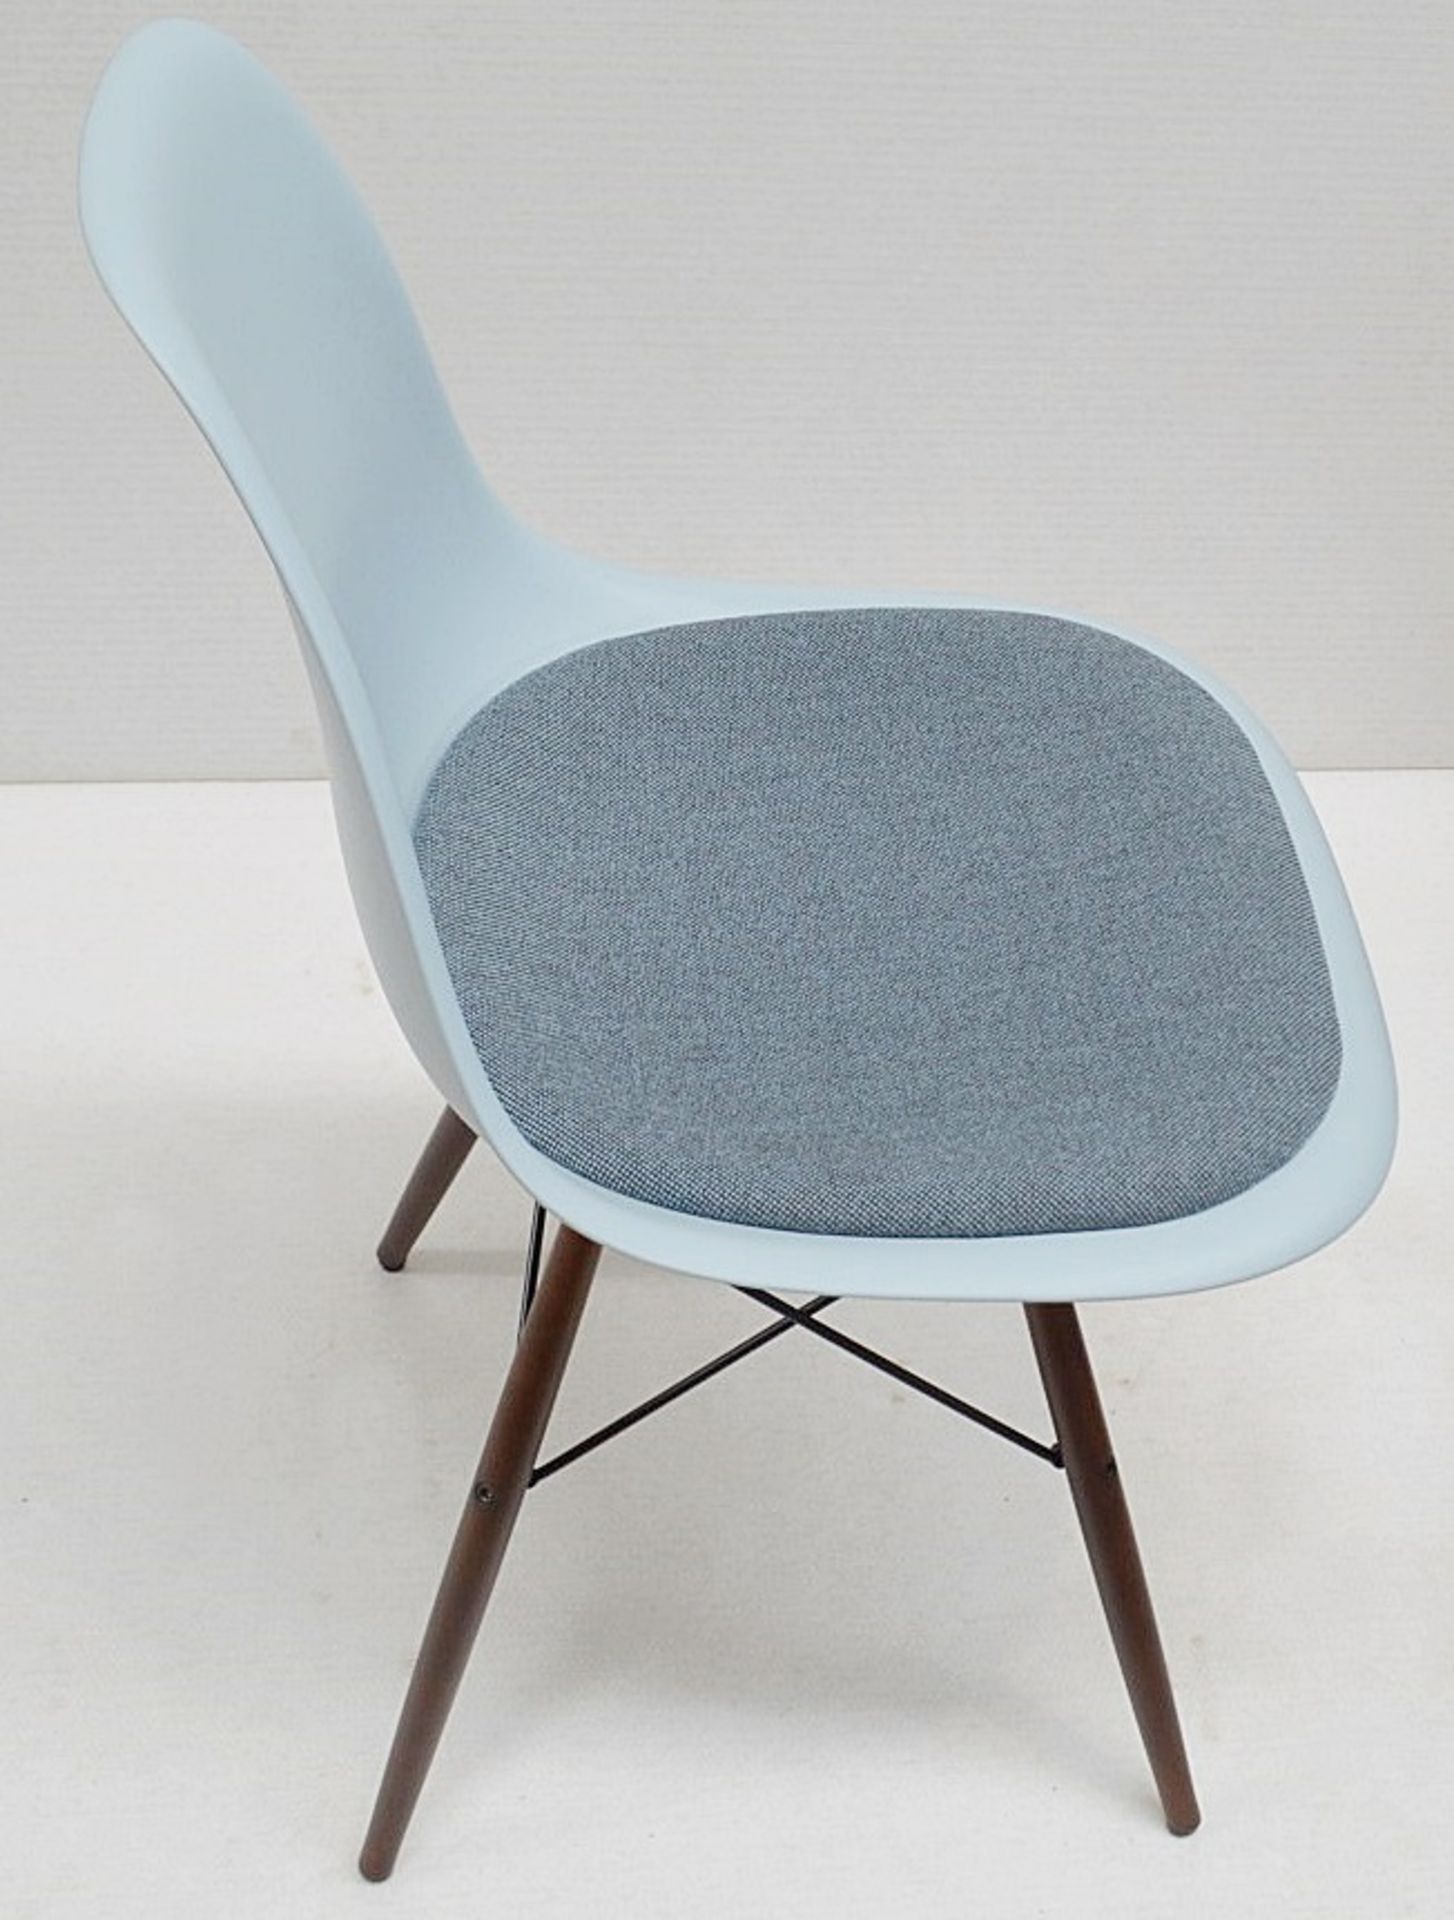 1 x VITRA Eames DSW Designer Chair With Upholsted Seat And Maple Base In A Dark Stain - Image 4 of 9